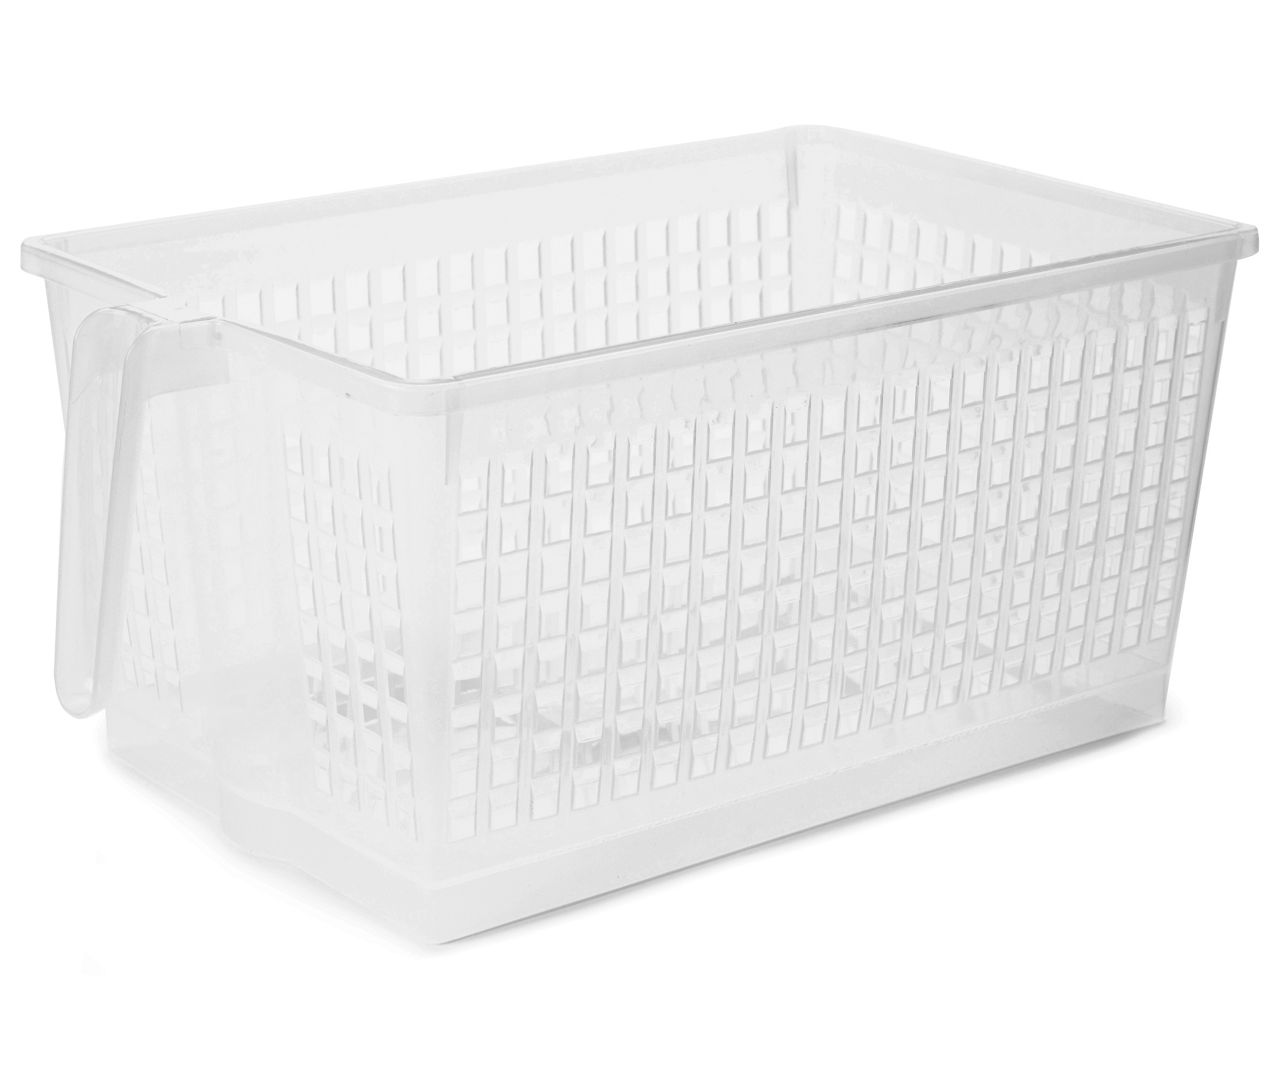 Storage Baskets For Organizing - 4 Small Storage Bins With Lids And Handles  - Closet Shelf Organizer And Toy Box For Kids Organization And Storage - F  - Yahoo Shopping